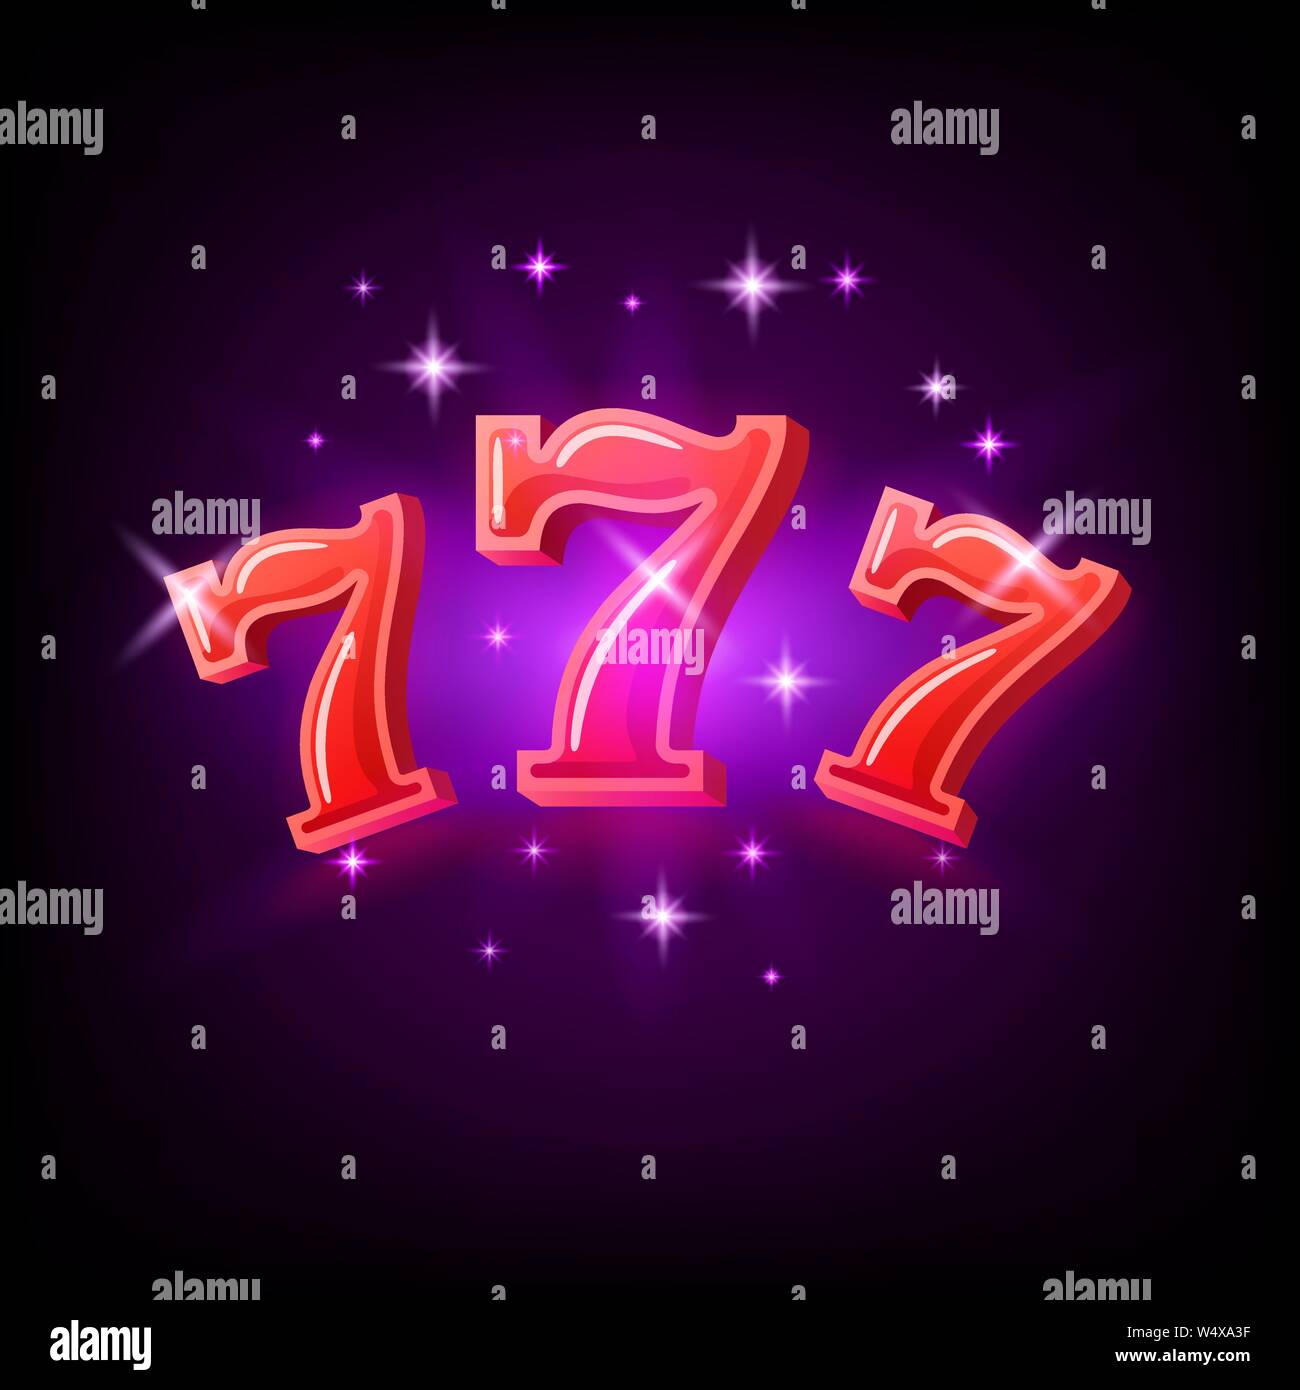 Big win slots red 777 banner casino on the purple background. Vector illustration Stock Vector